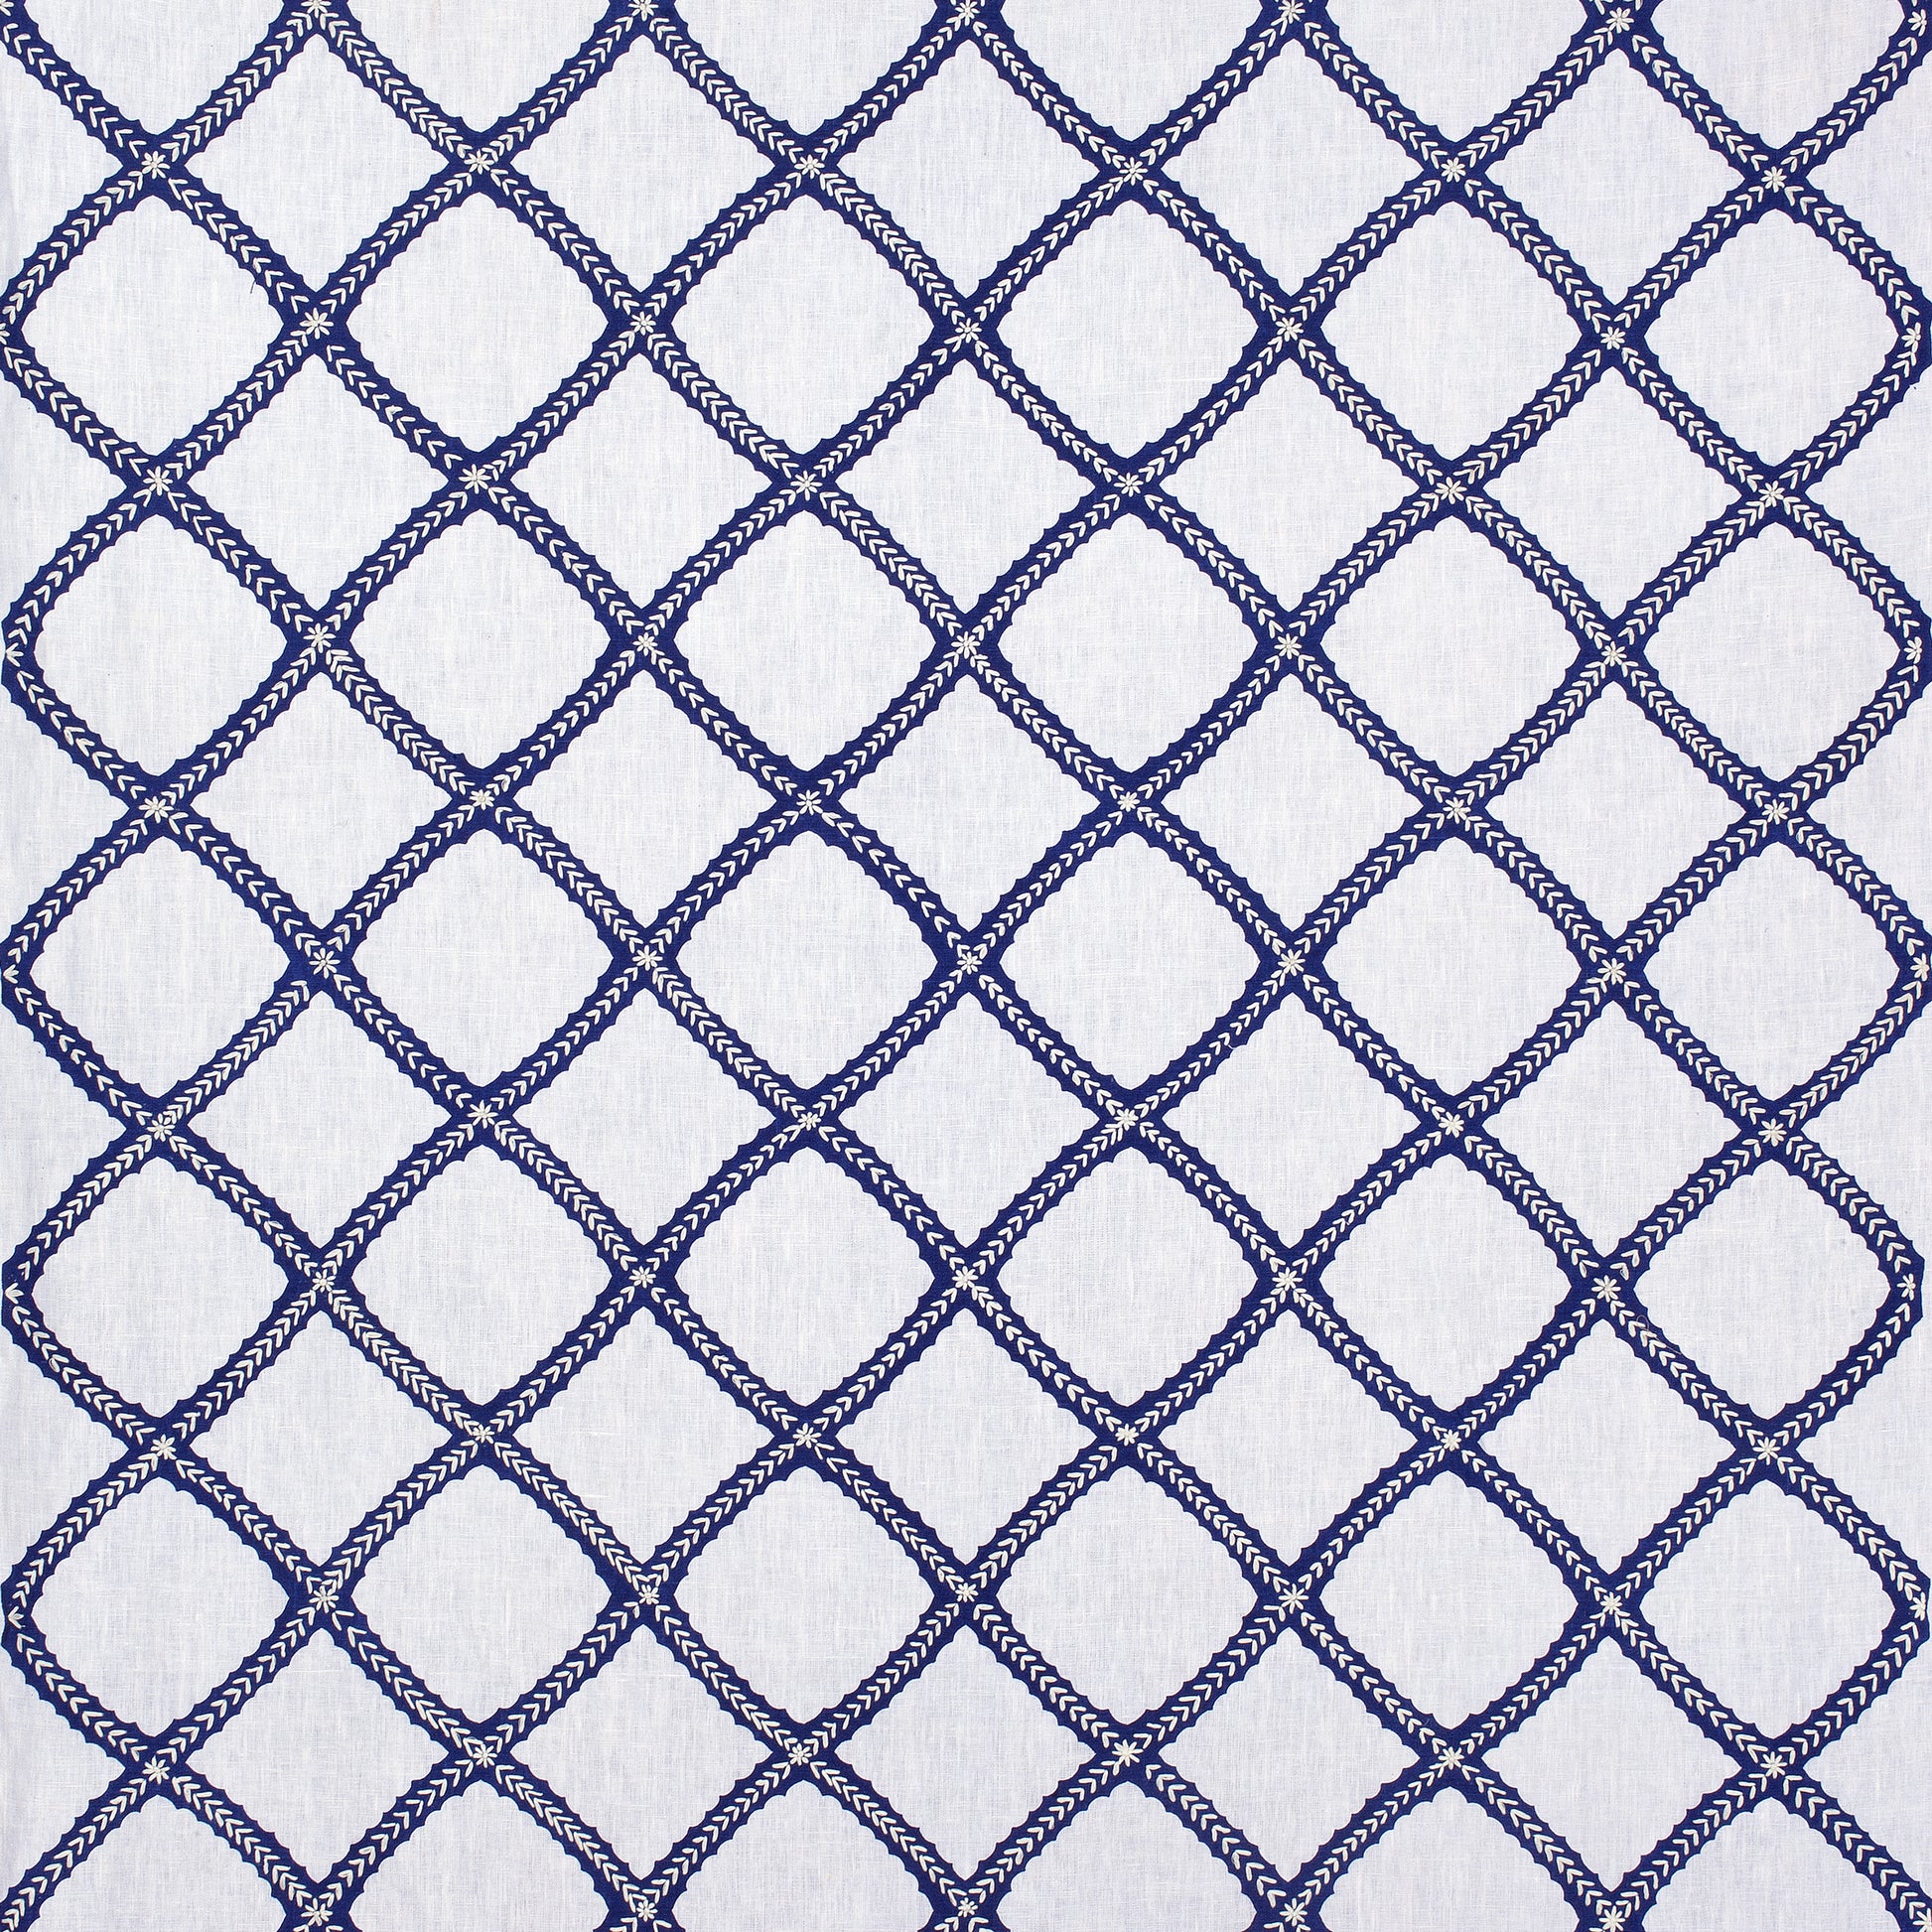 Purchase Thibaut Fabric Pattern# W788706 pattern name Majuli Embroidery color Navy on White